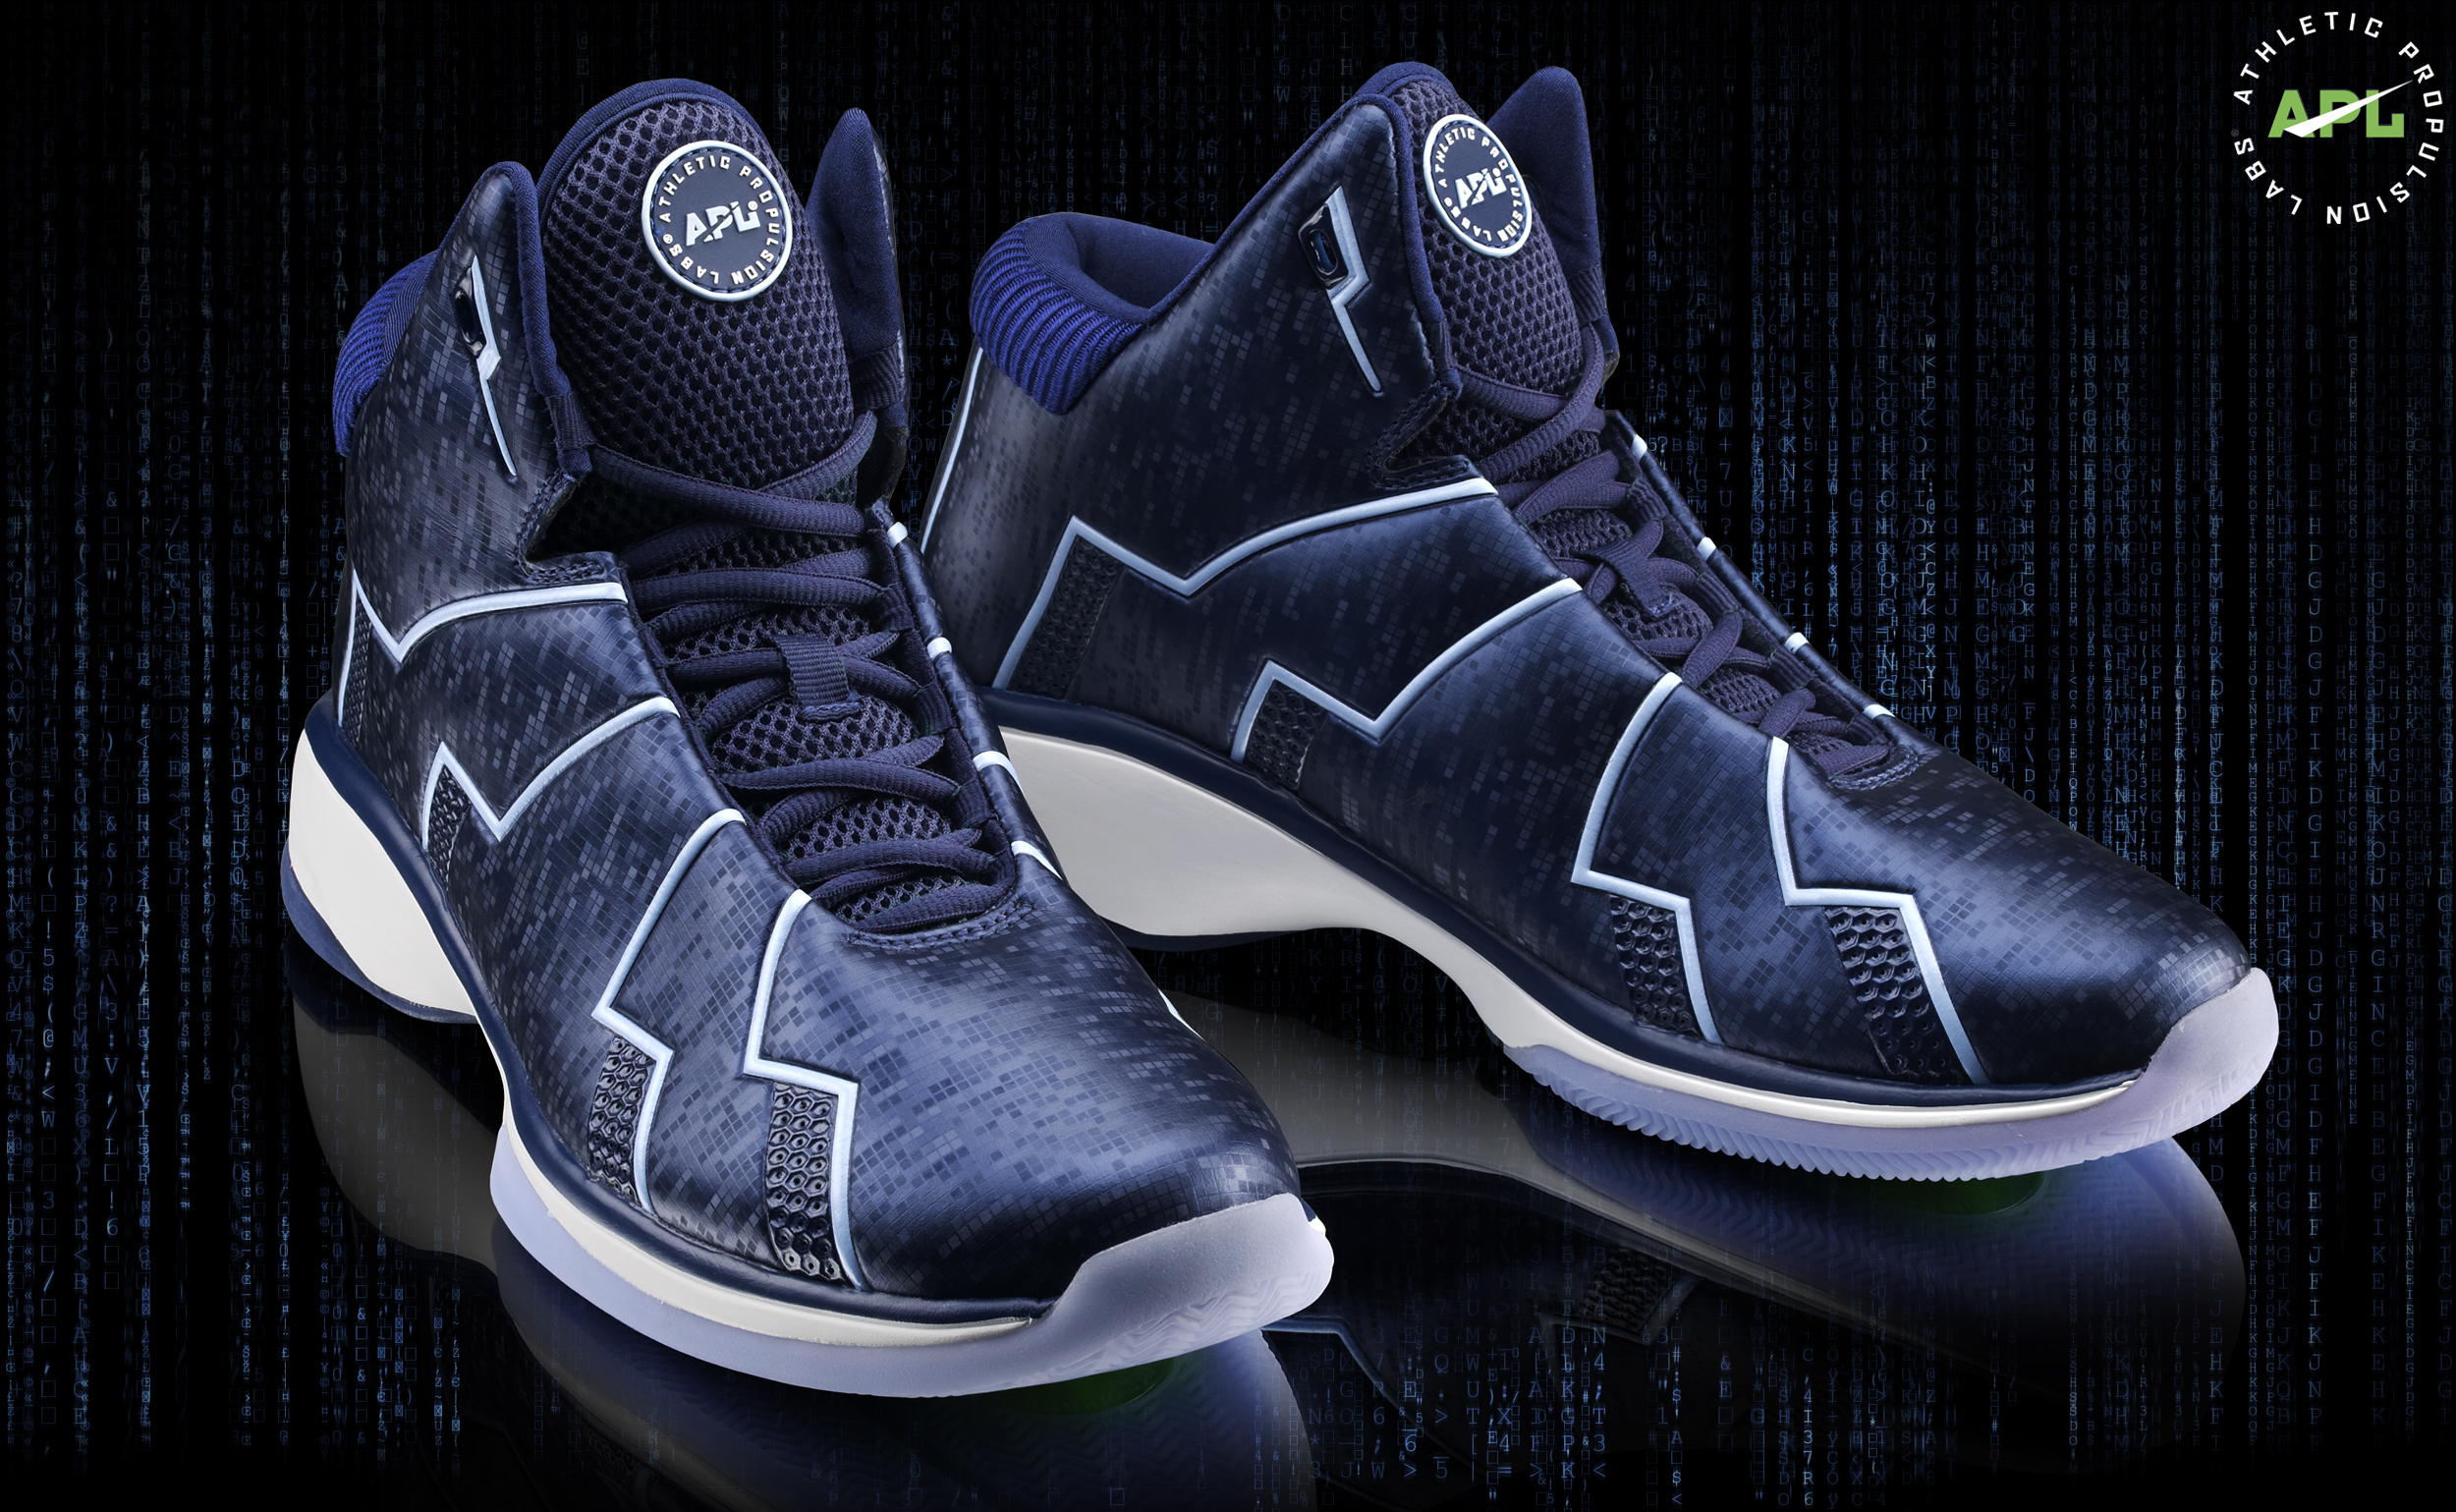 Athletic Propulsion Labs Releases Limited Edition DNA-Patterned